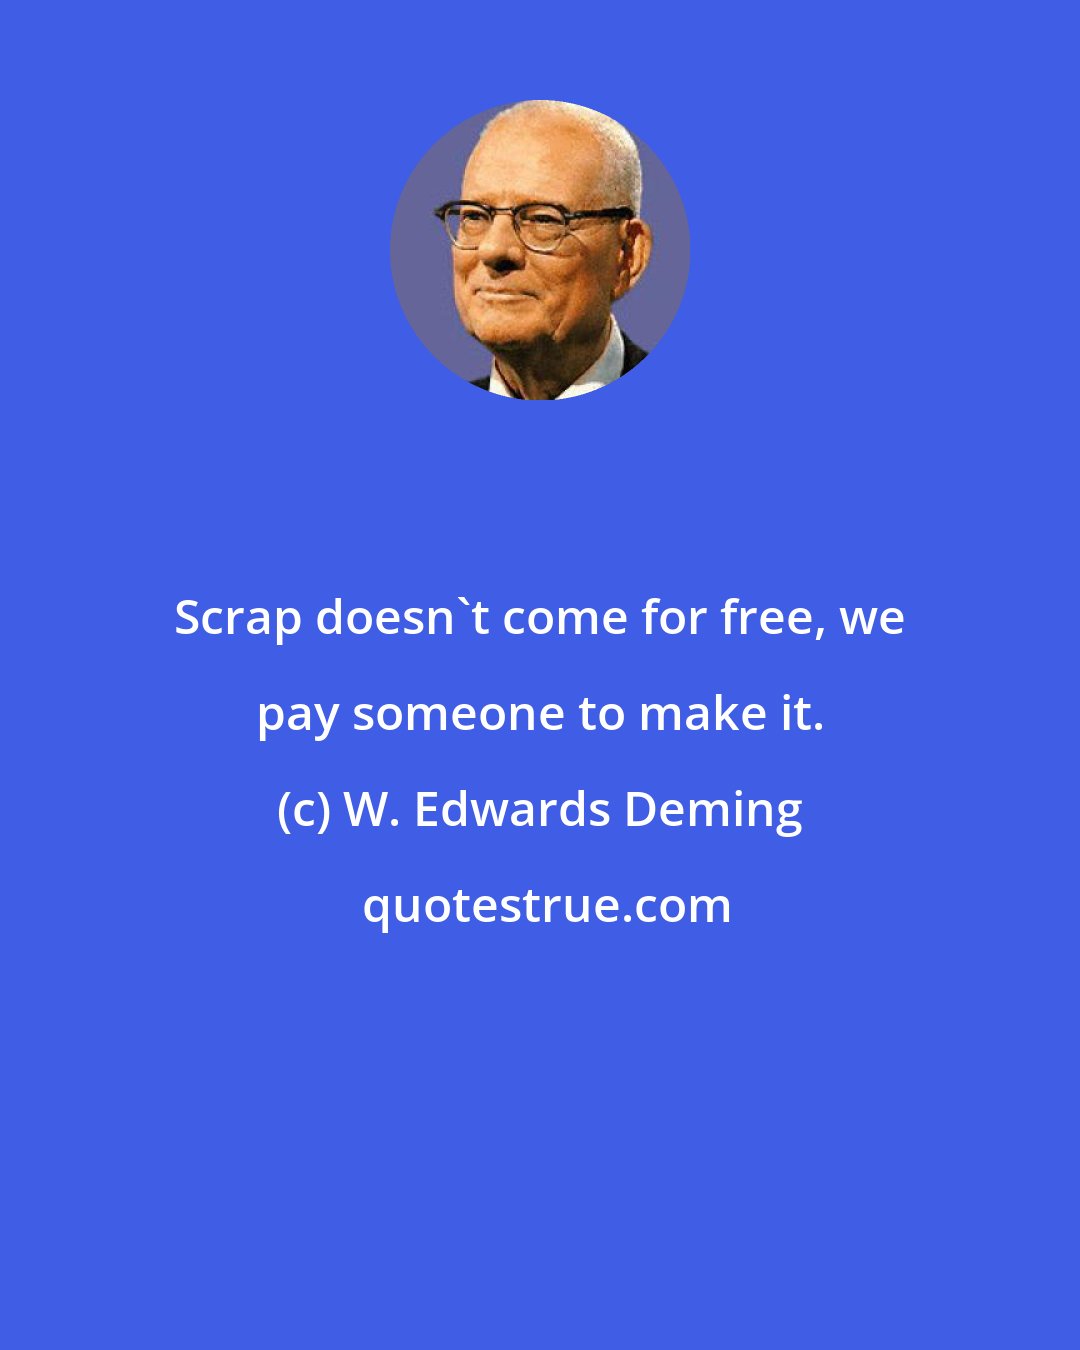 W. Edwards Deming: Scrap doesn't come for free, we pay someone to make it.